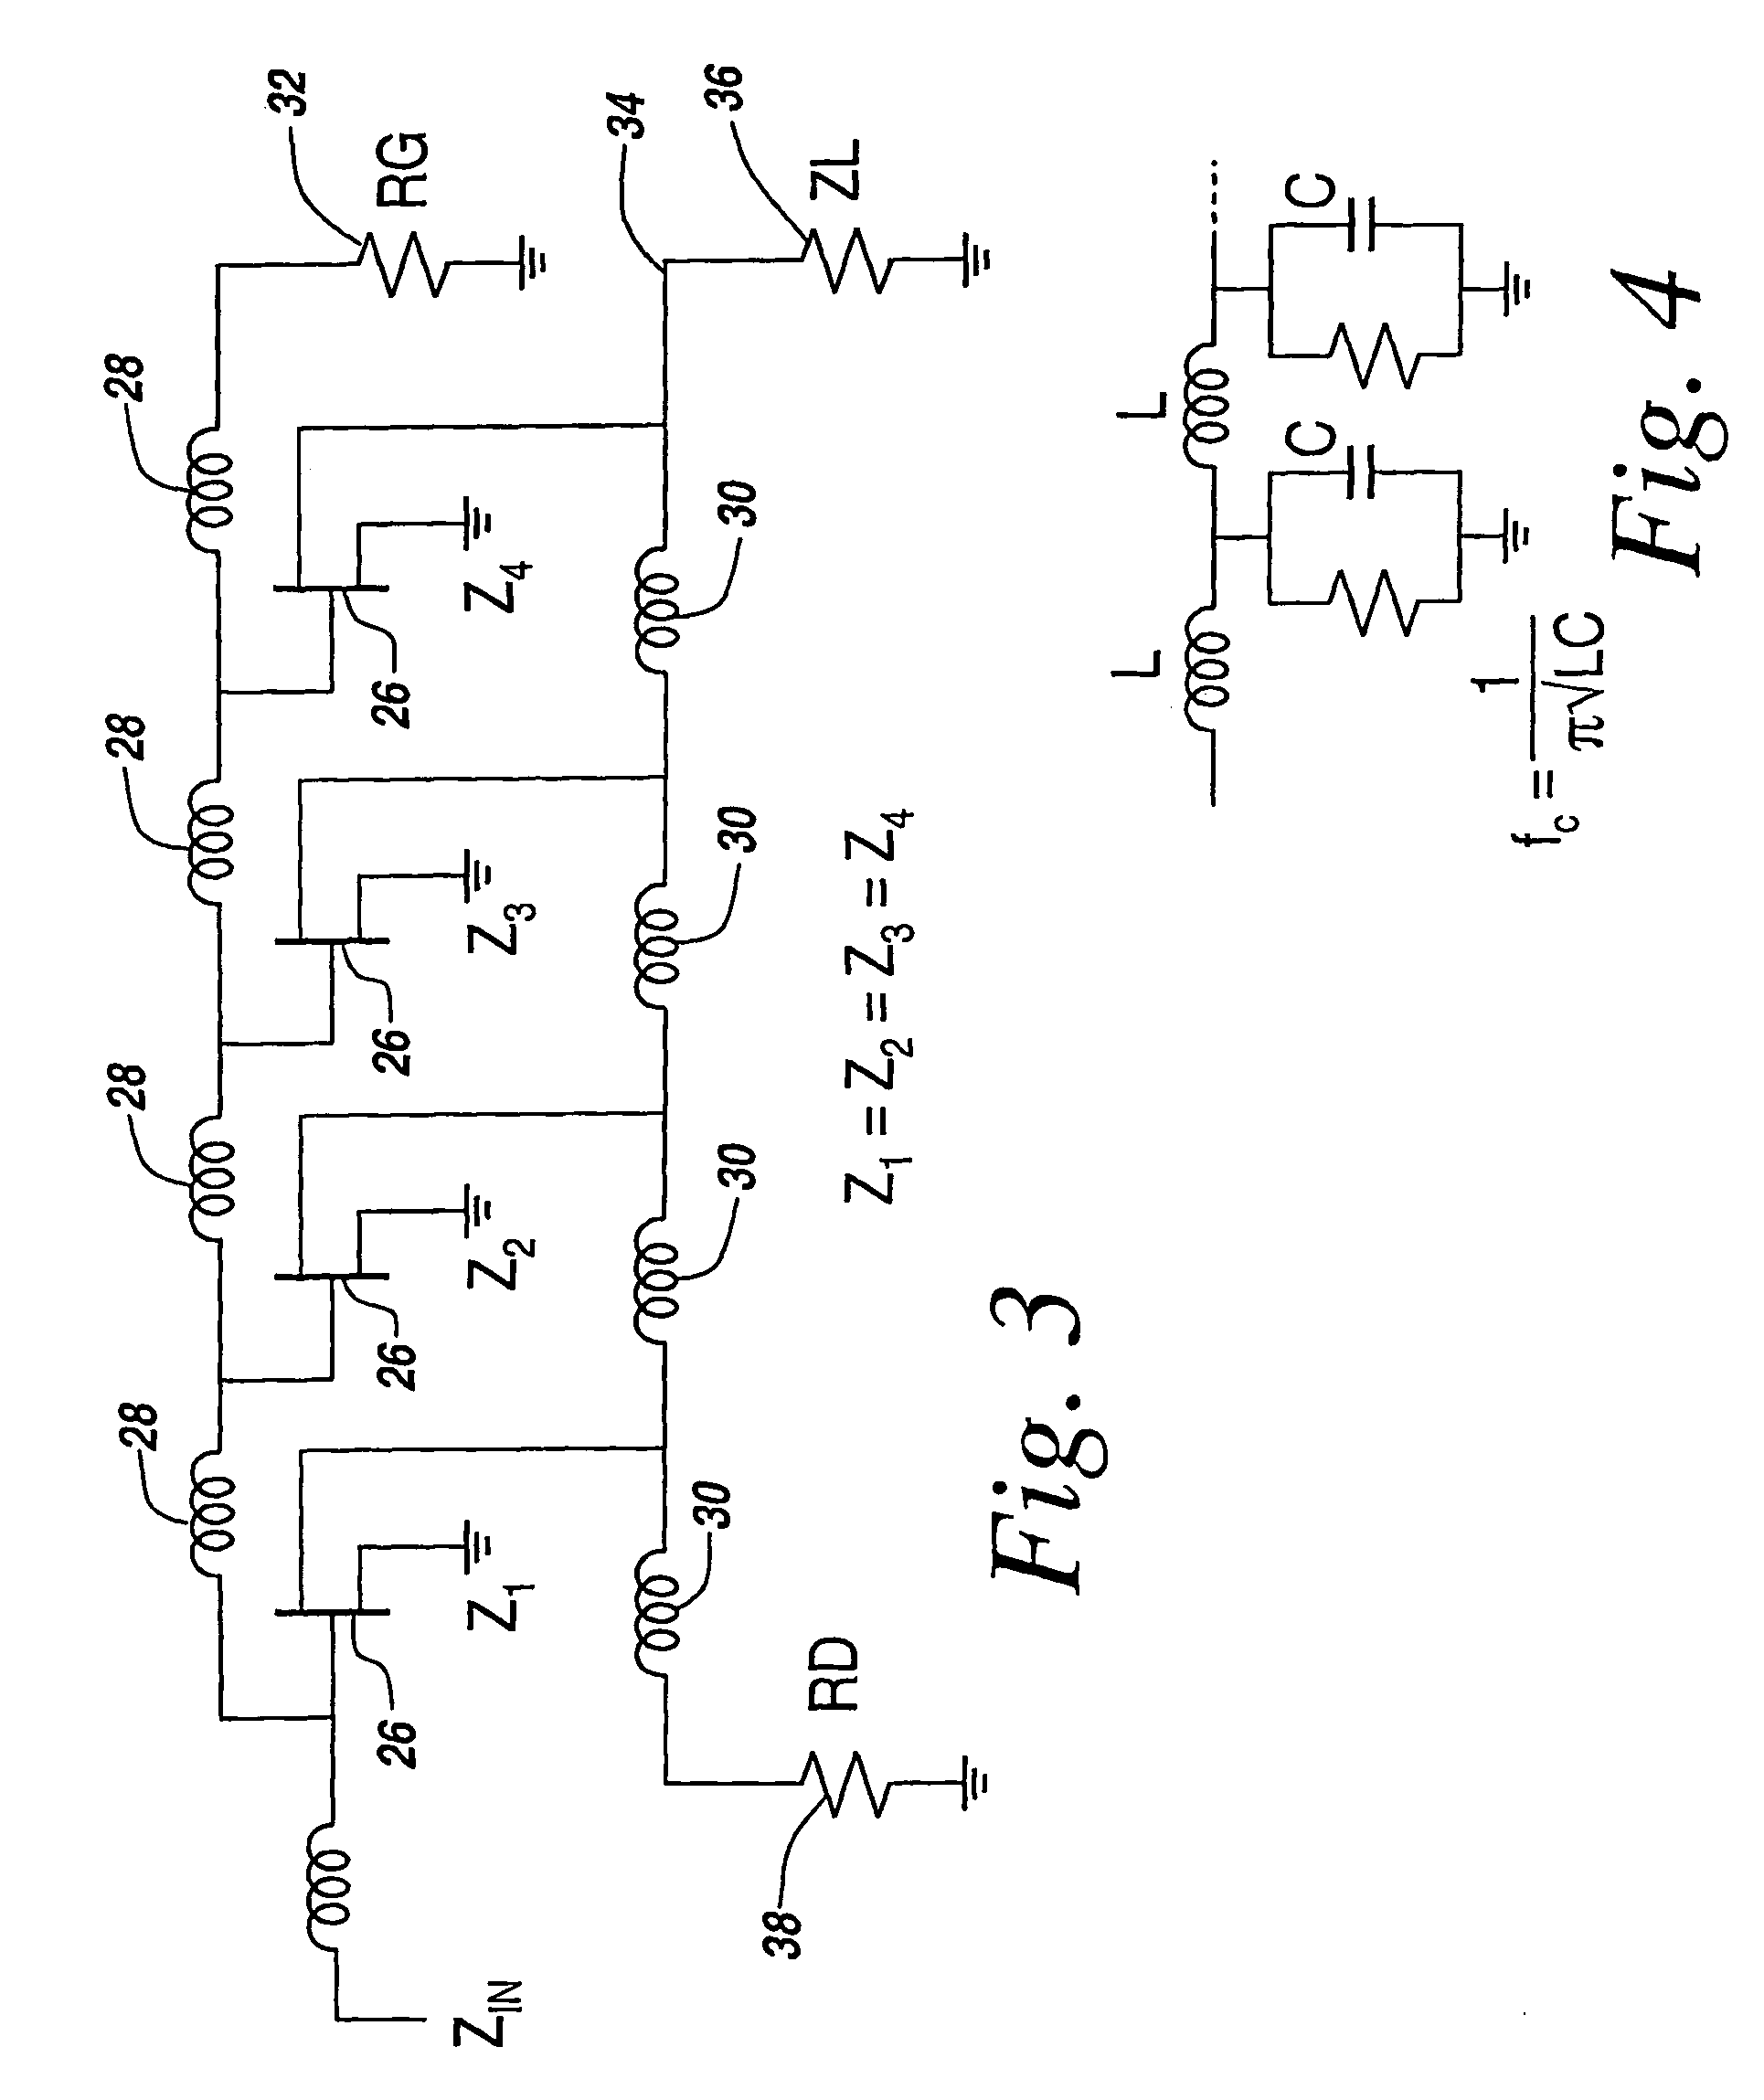 Solid-state ultra-wideband microwave power amplifier employing modular non-uniform distributed amplifier elements